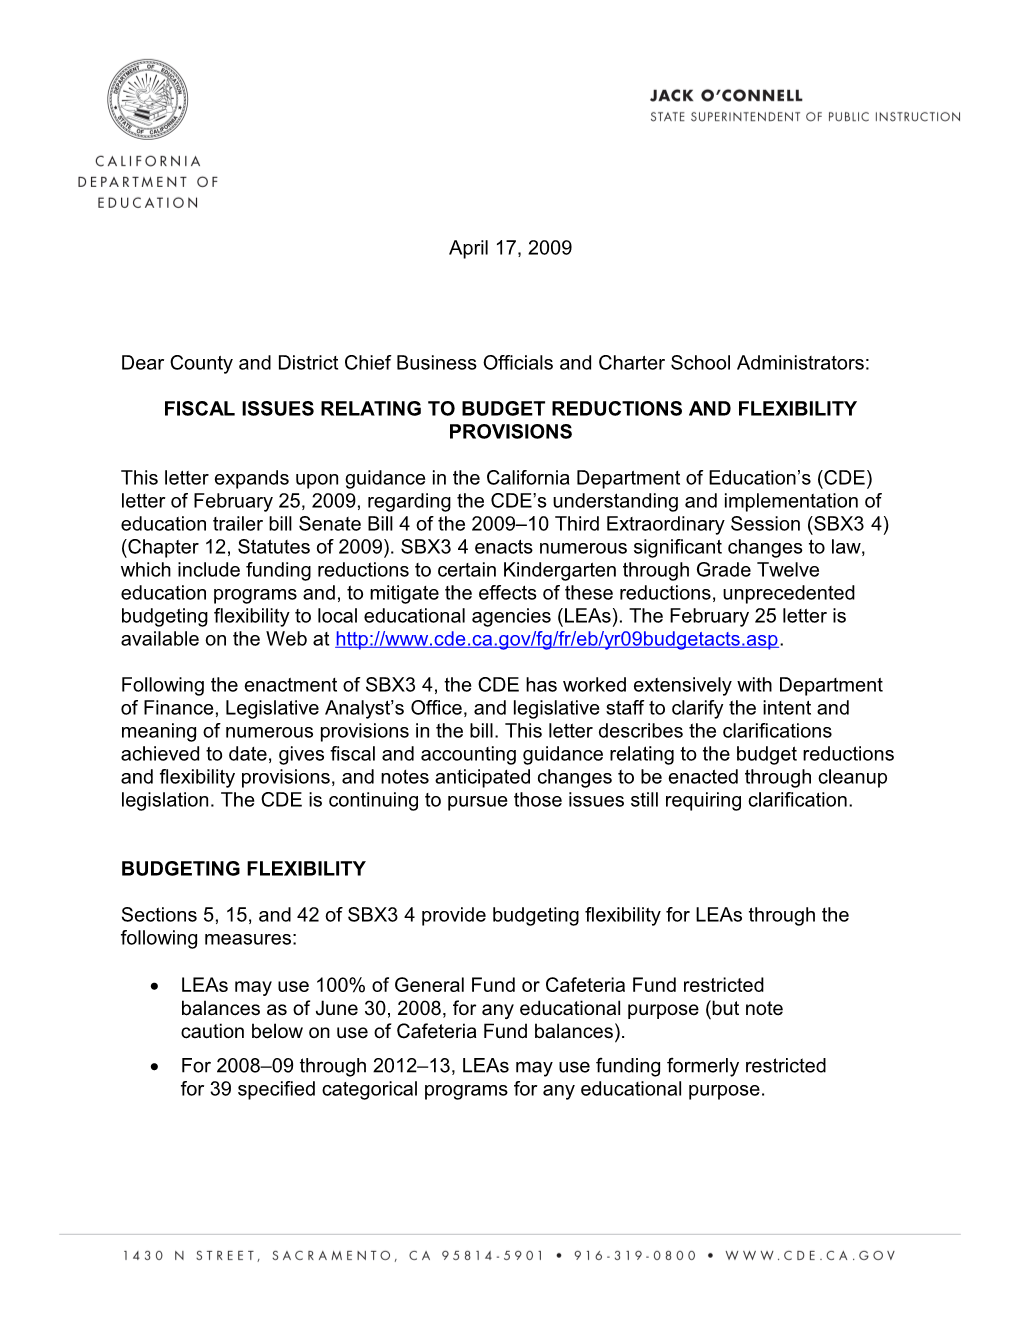 Budget Cuts and Flexibility Fiscal Issues - Correspondence (CA Dept of Education)